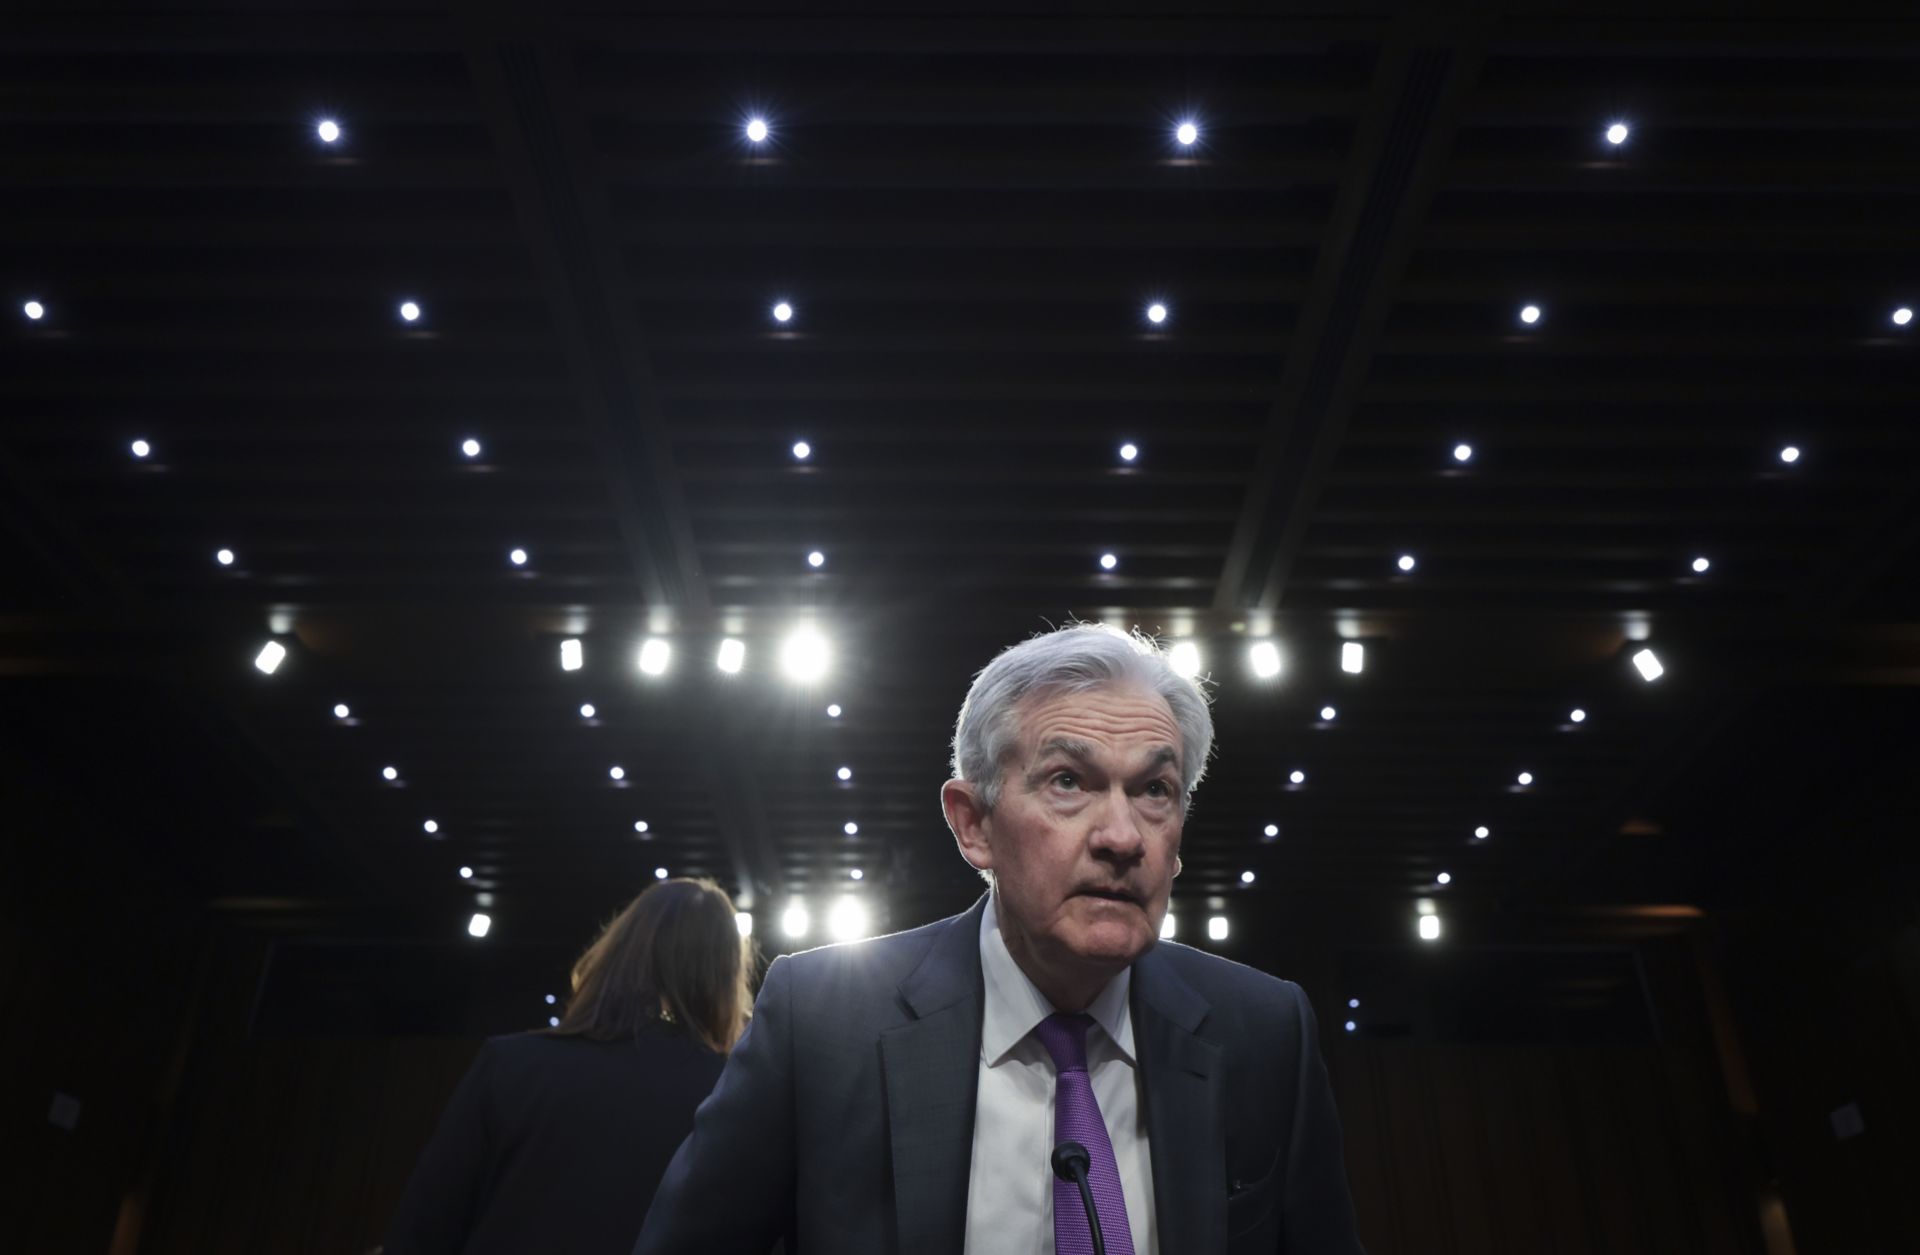 U.S. Federal Reserve Chair Jerome Powell testifies before the Senate Banking Committee on March 7, 2023, where he spoke on the state of the U.S. economy and the potential for further interest rate hikes to curb inflation.